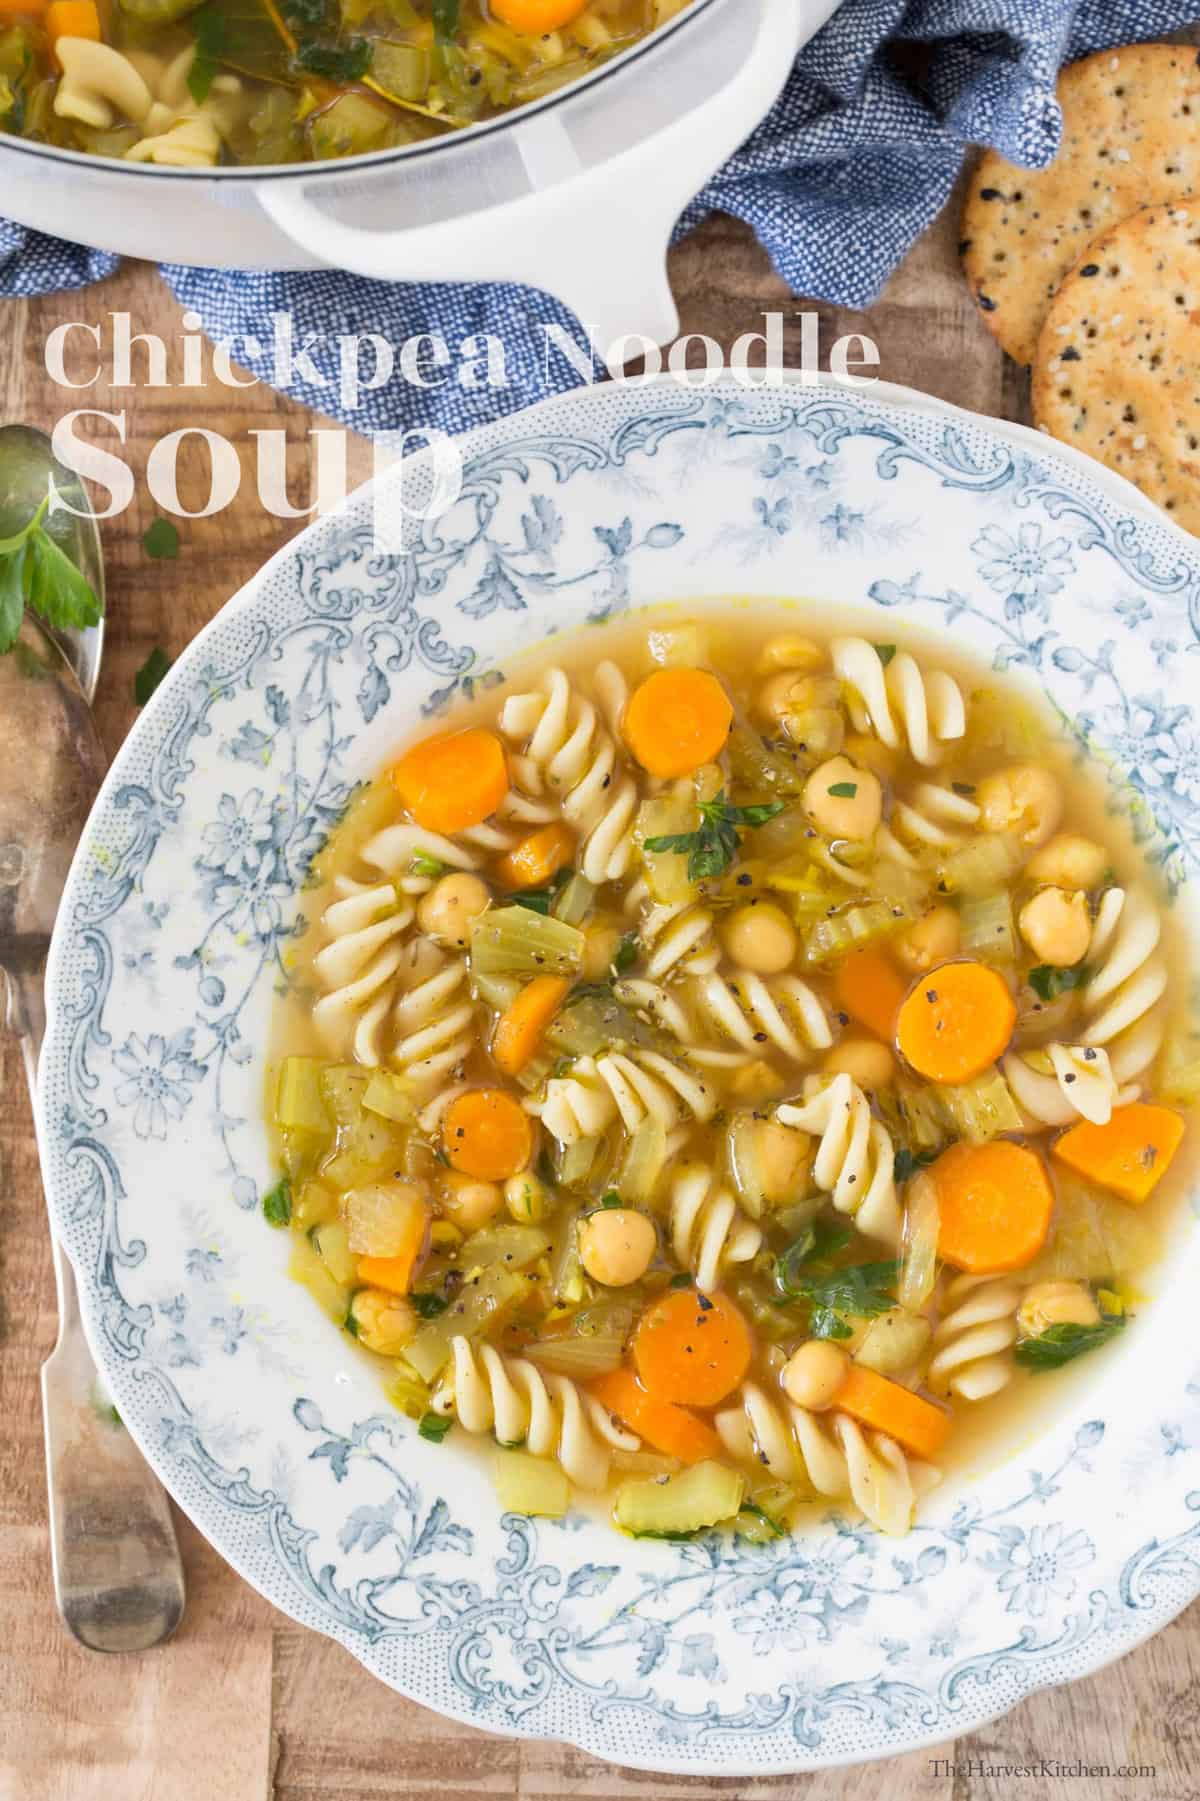 https://www.theharvestkitchen.com/wp-content/uploads/2020/04/vegetable-noodle-chickpea-soup-scaled.jpg